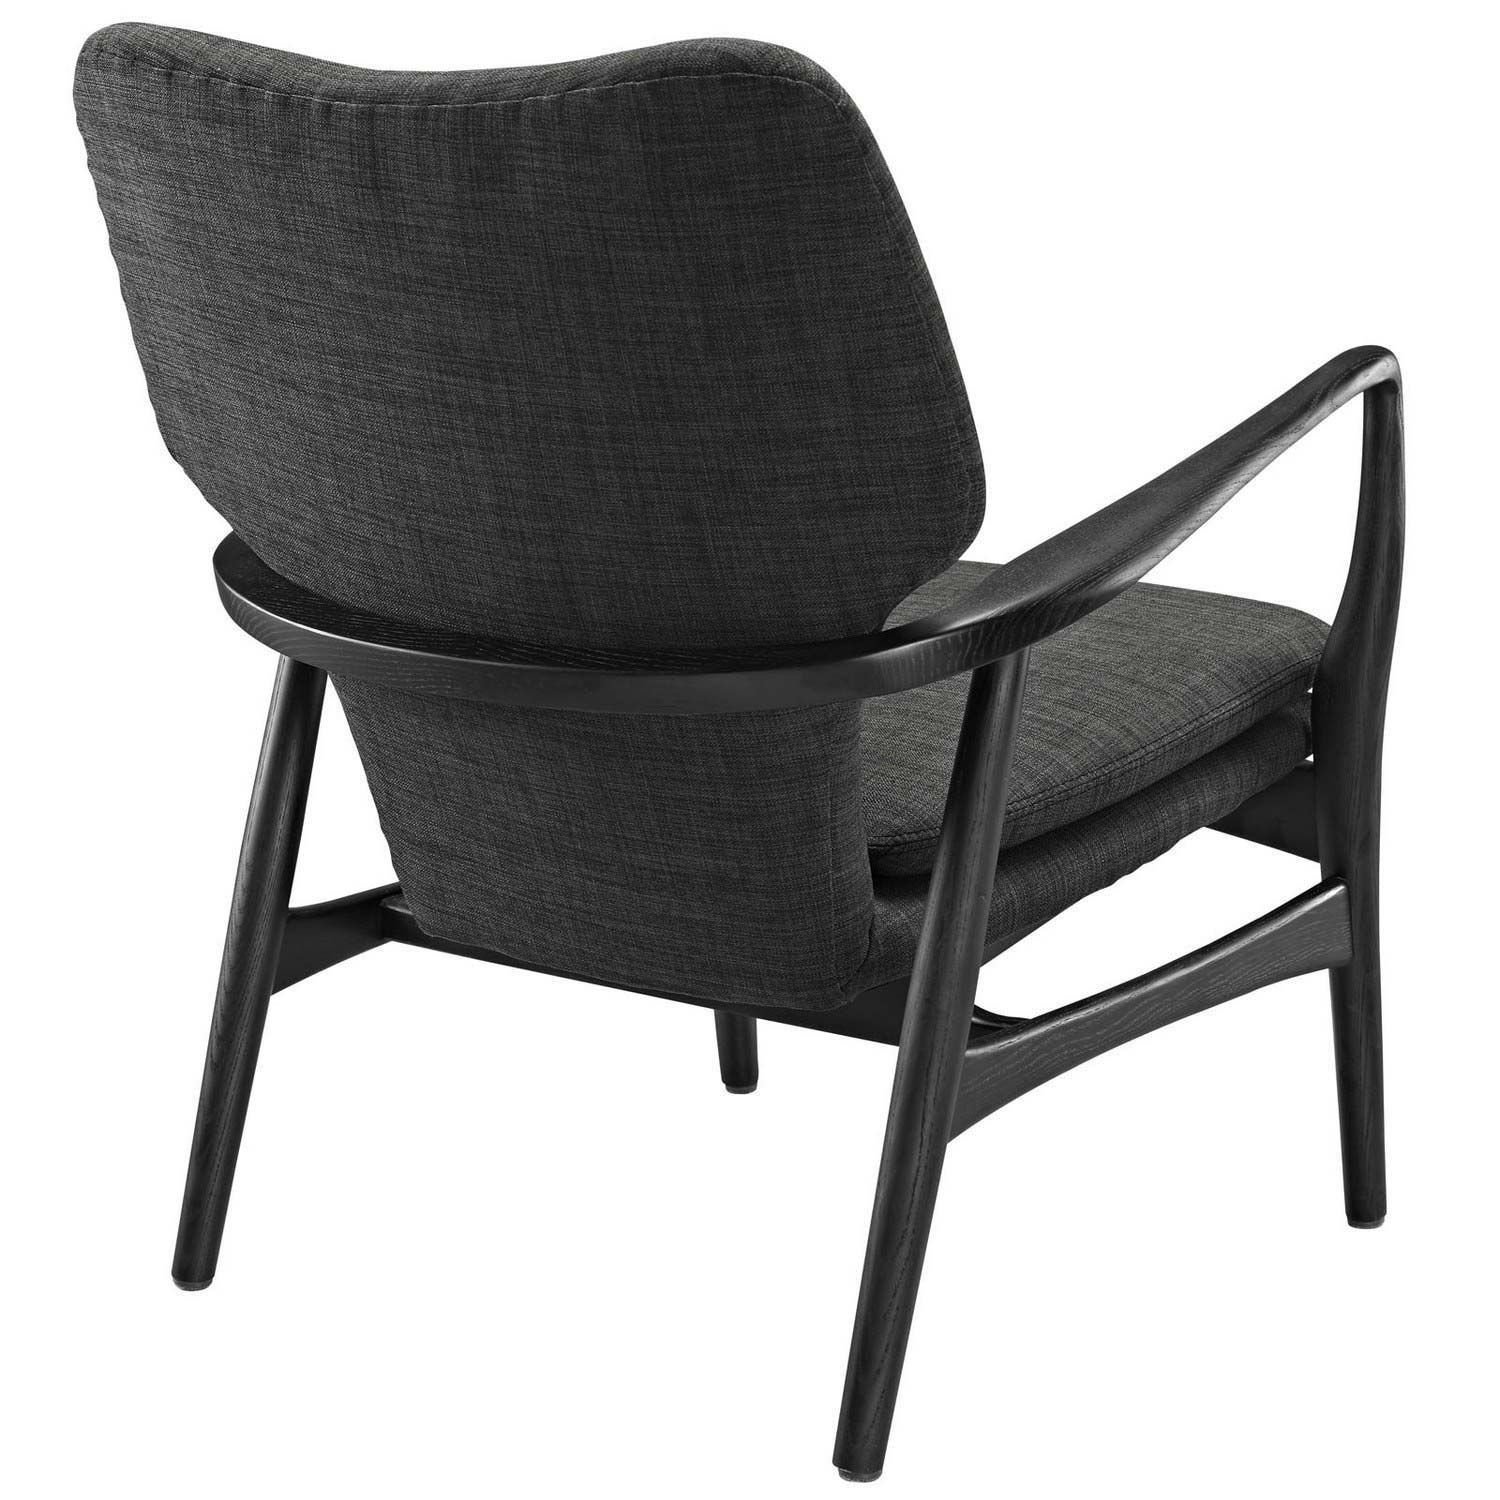 Modway Heed Lounge Chair - Black/Gray